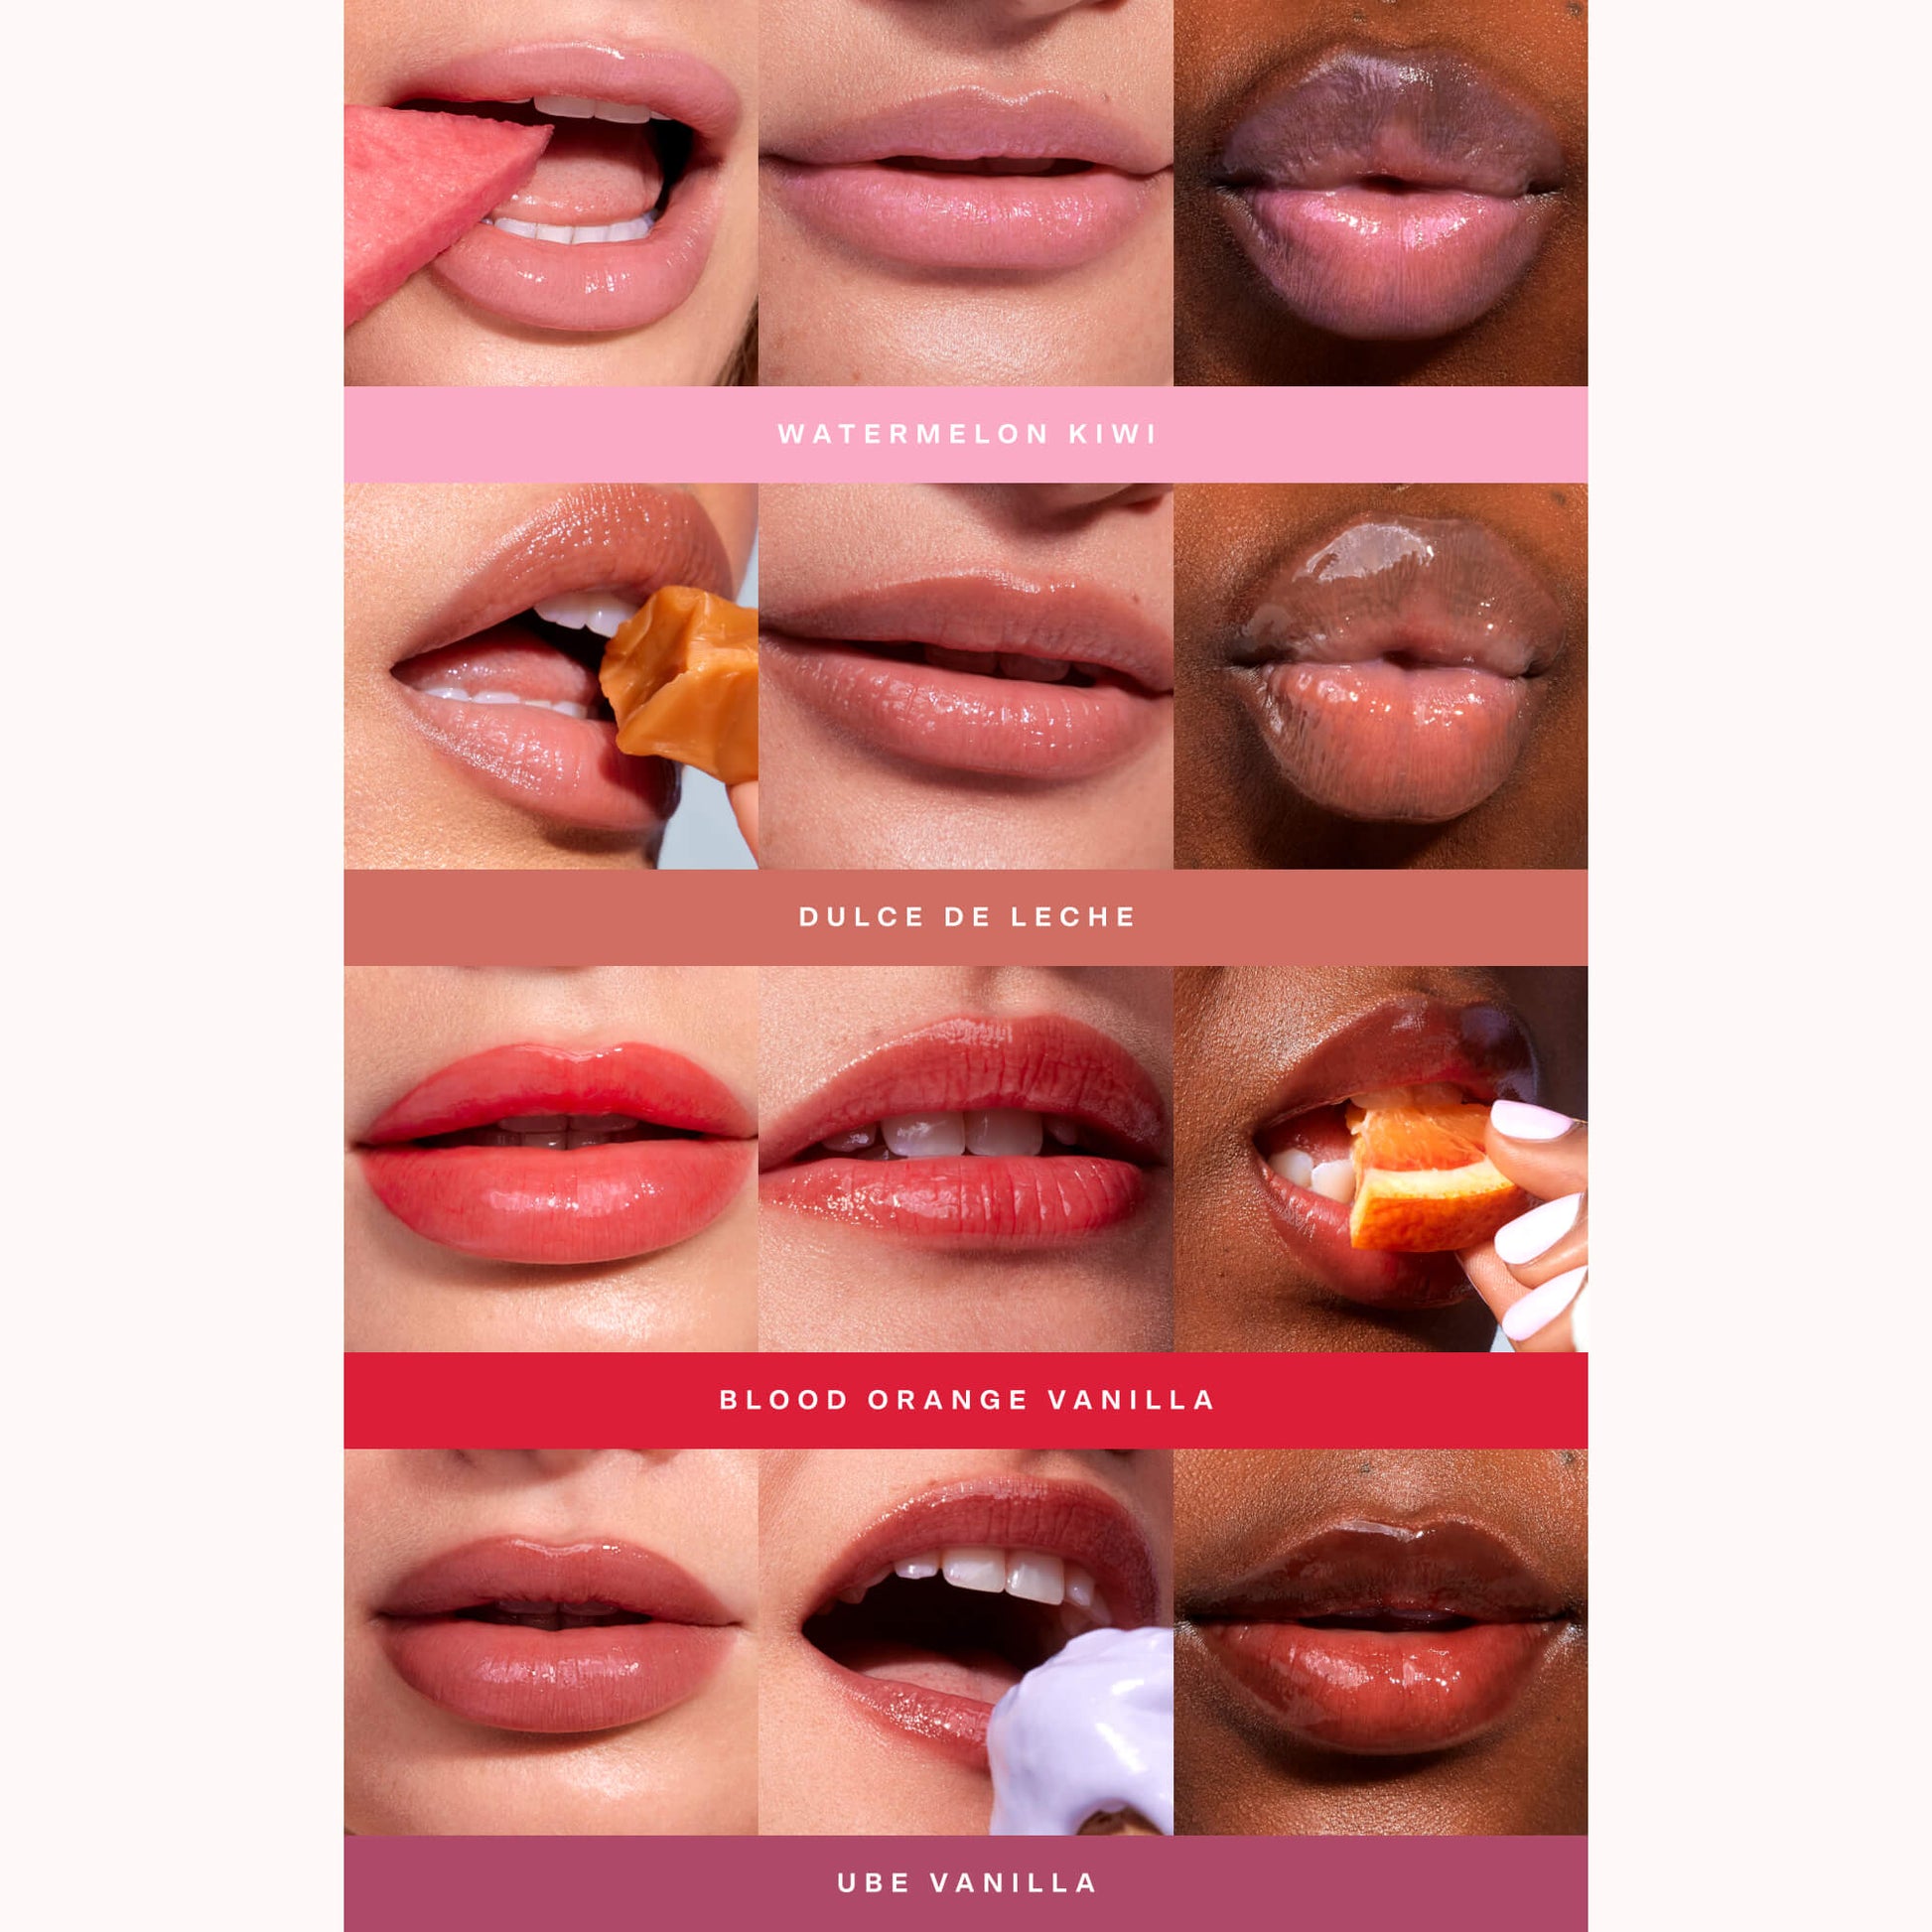 [Shared: Tinted shades of the Tower 28 Beauty LipSoftie™ Lip Treatment applied on three different skin tones